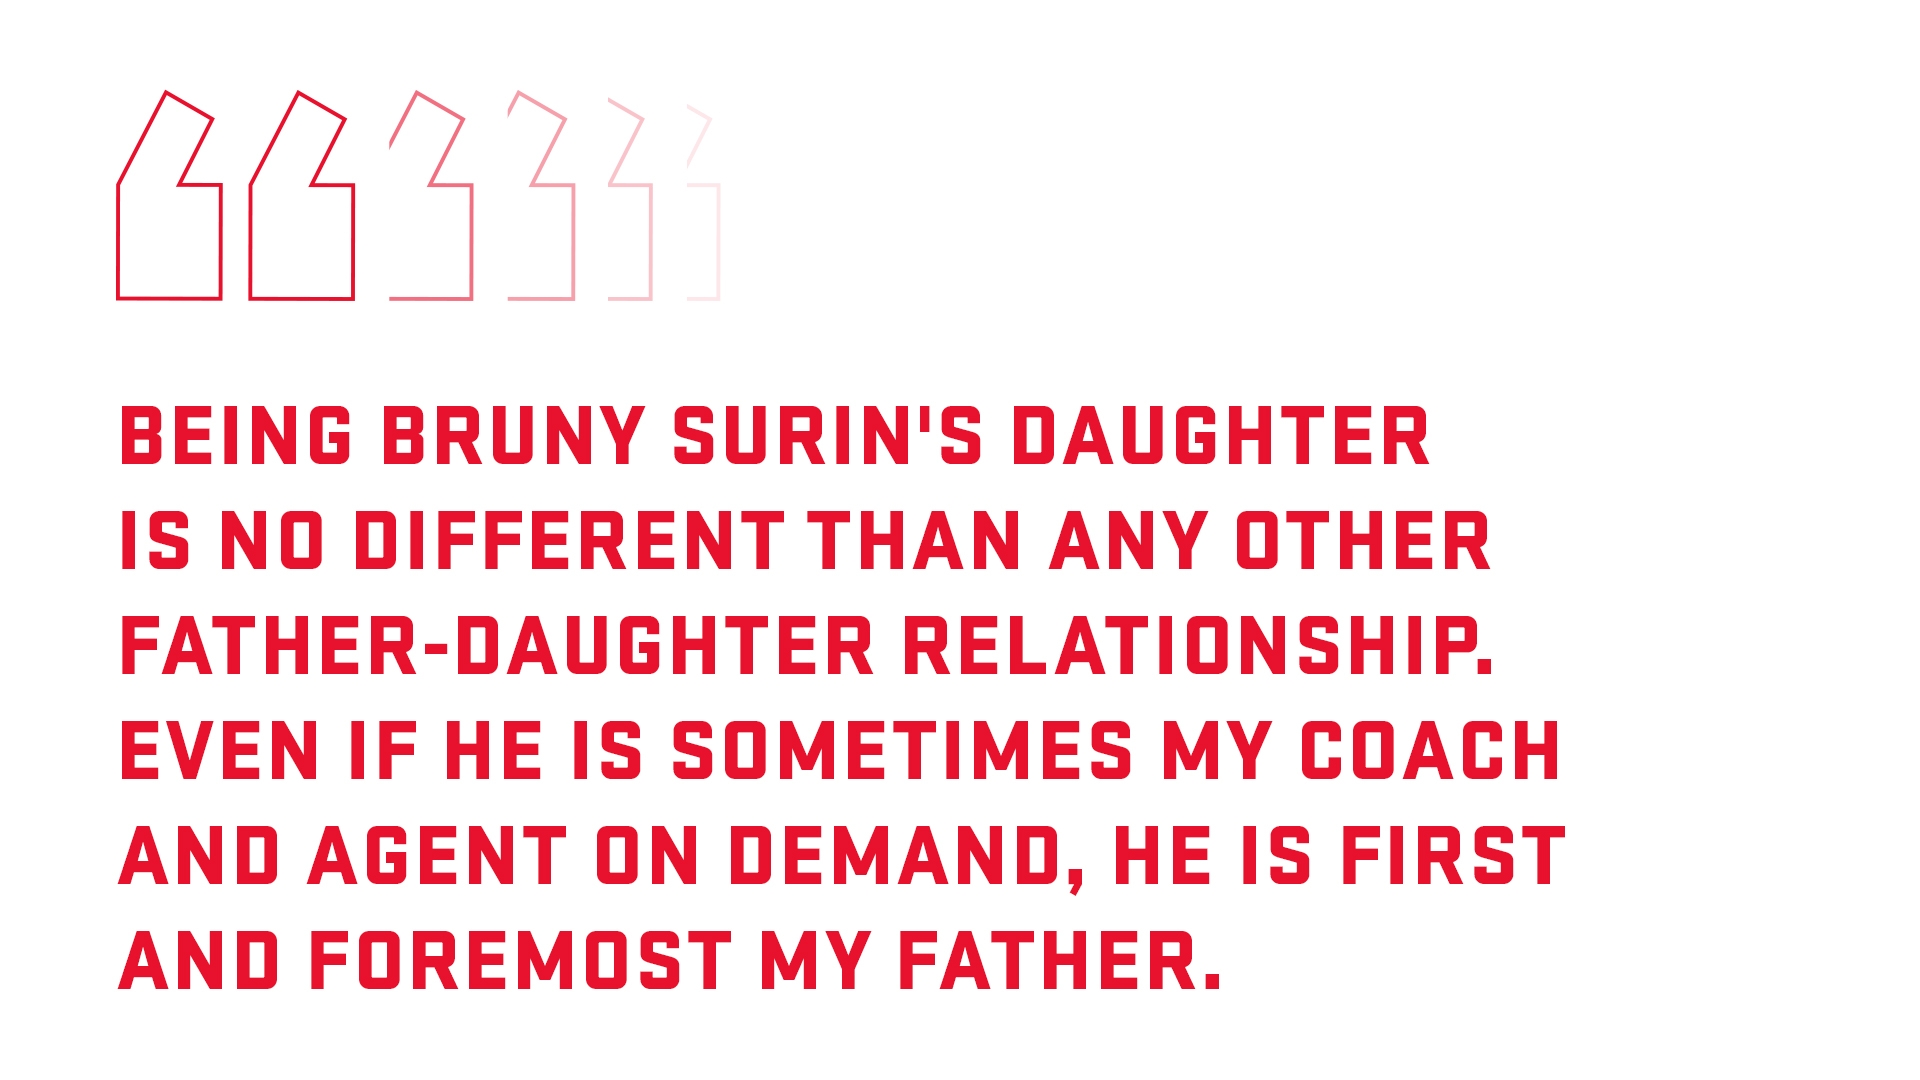 Graphic with a quote: Being Bruny Surin’s daughter is no different than any father-daughter relationship. Even though he is sometimes a coach and an agent on-demand, above all he’s my father.